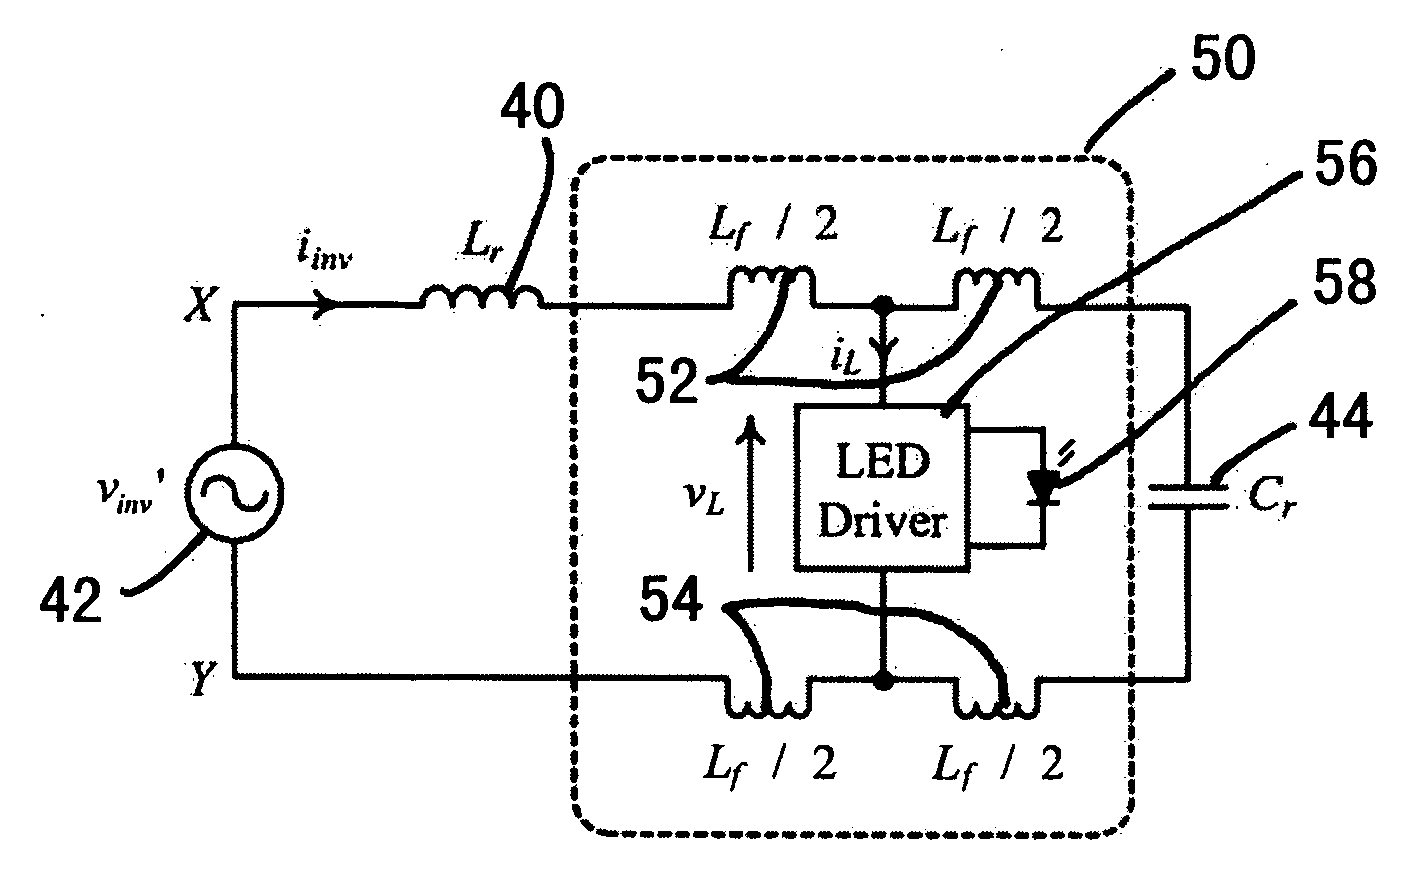 Apparatus or circuit for driving a DC powered lighting equipment